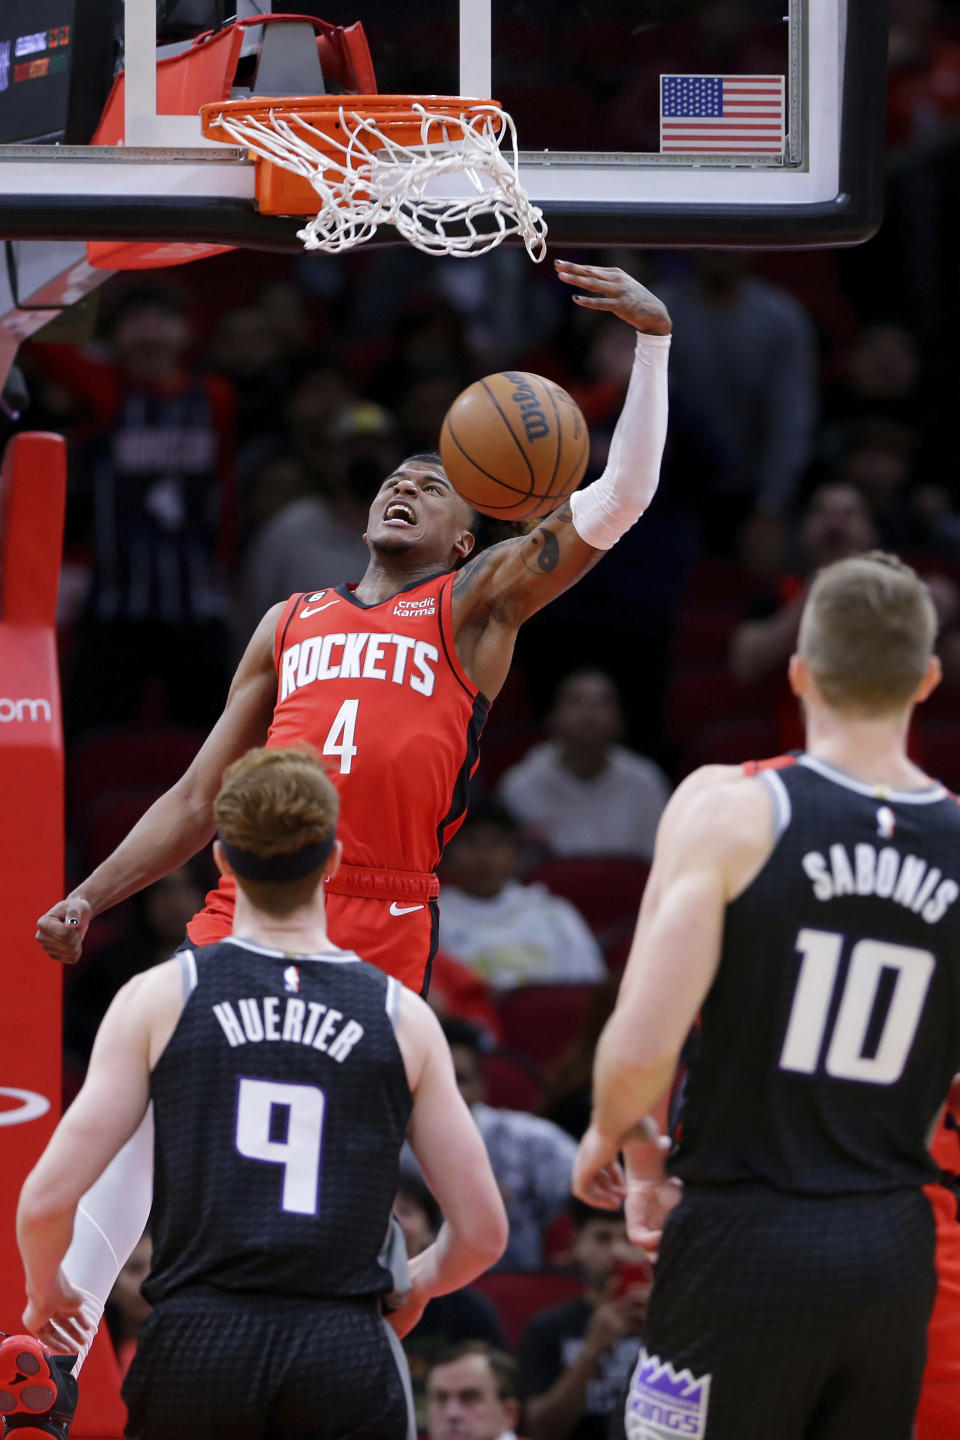 Houston Rockets guard Jalen Green (4) dunks in front of Sacramento Kings guard Kevin Huerter (9) and forward Domantas Sabonis (10) during the first half of an NBA basketball game Wednesday, Feb. 8, 2023, in Houston. (AP Photo/Michael Wyke)